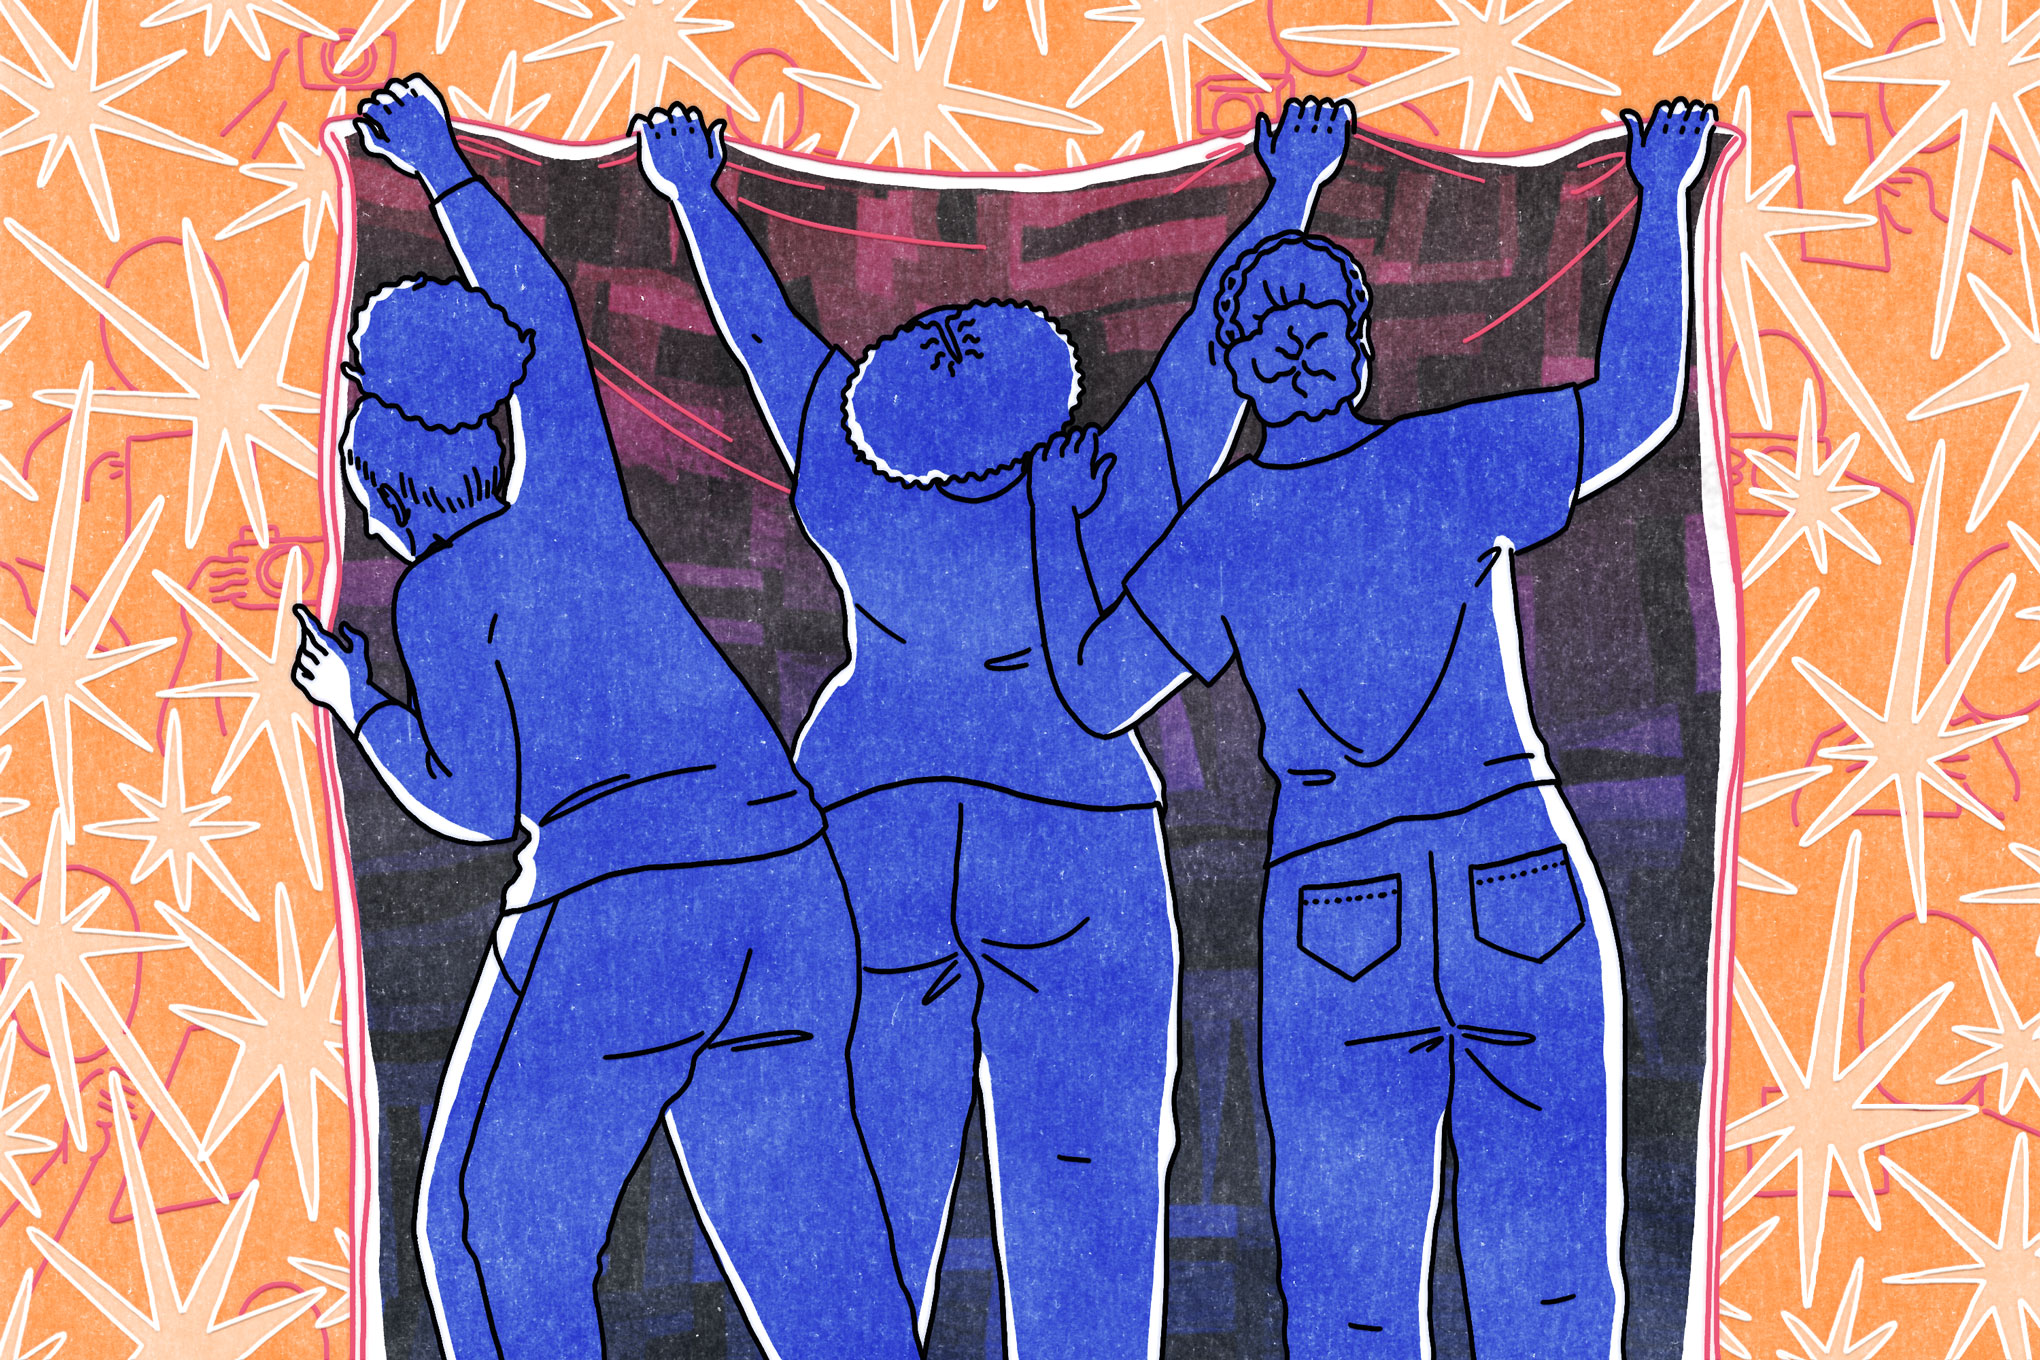 An illustration of three Black woman quilters, drawn in shades of blue, putting a quilt up against a star-patterned orange background.